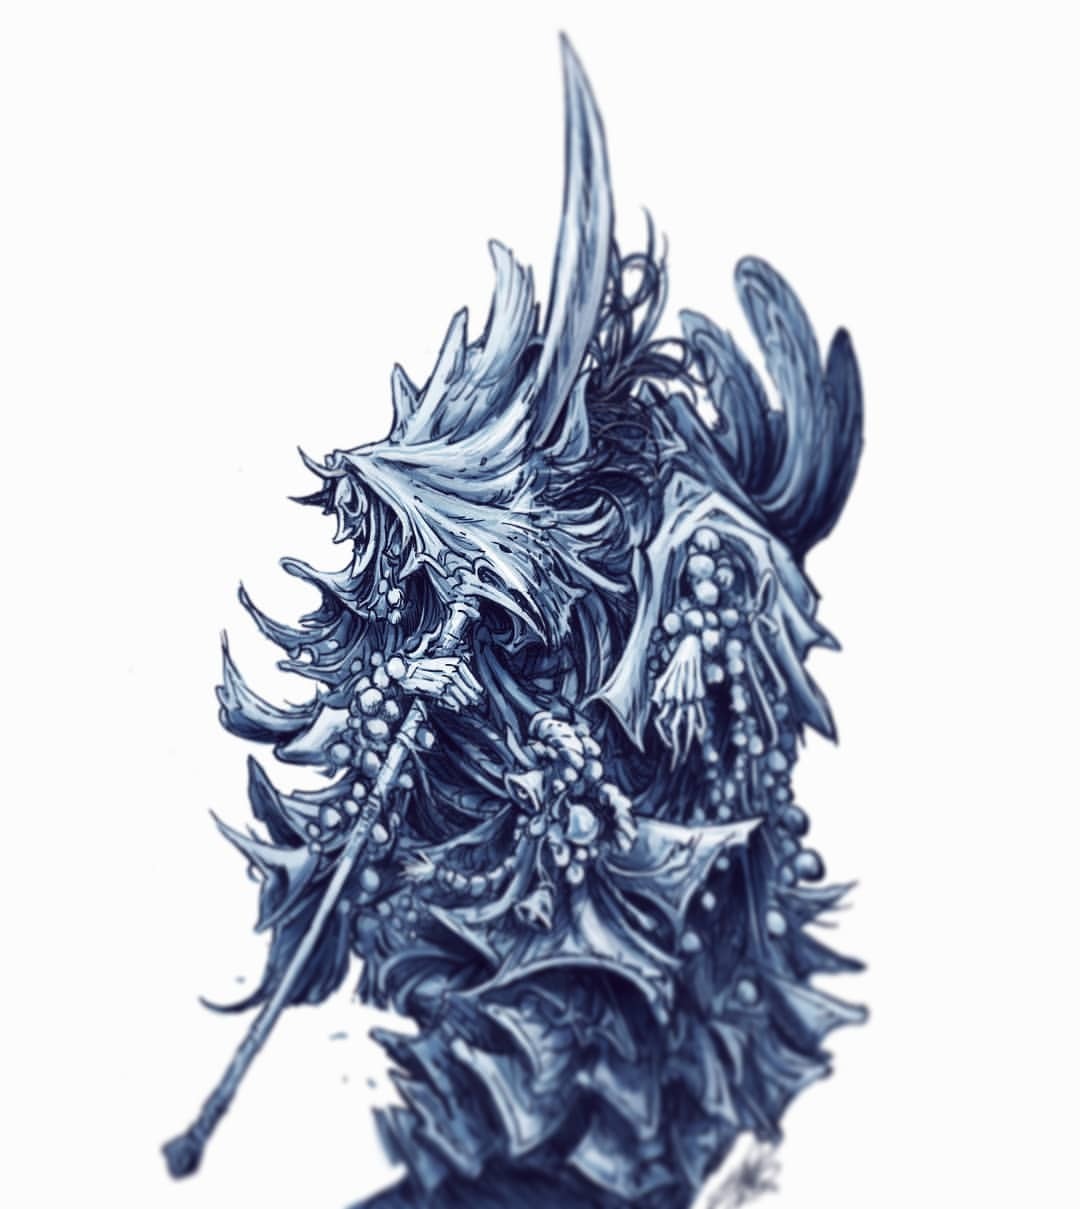 John Devlin Illustration — Day13 Corrupted Monk. Really loved this boss....